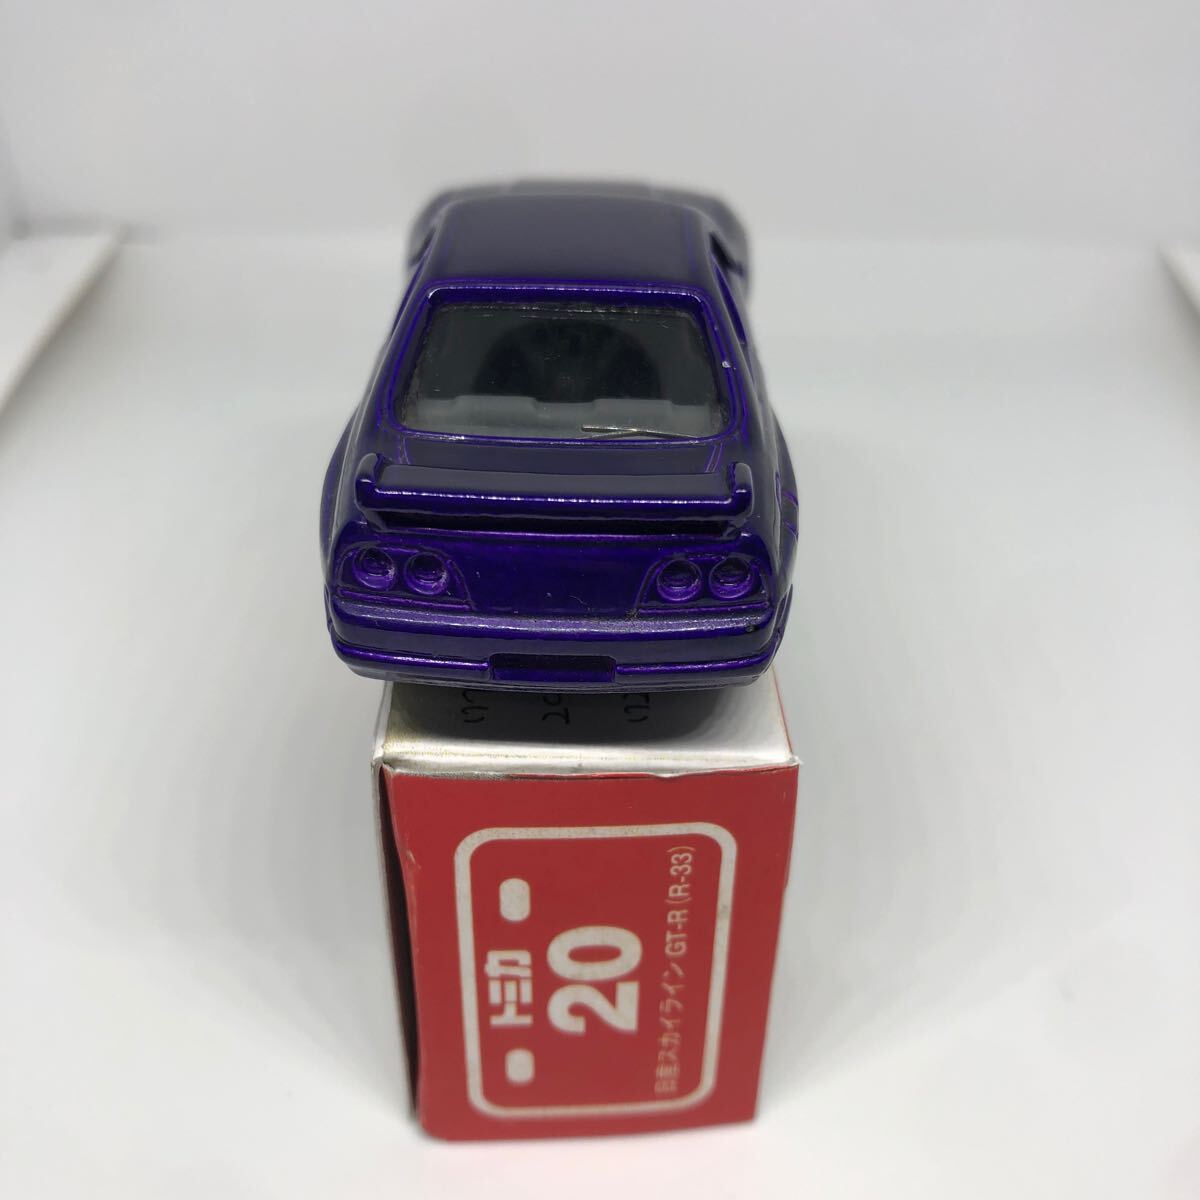  Tomica made in Japan red box 20 Nissan Skyline GT-R R-33 that time thing out of print 